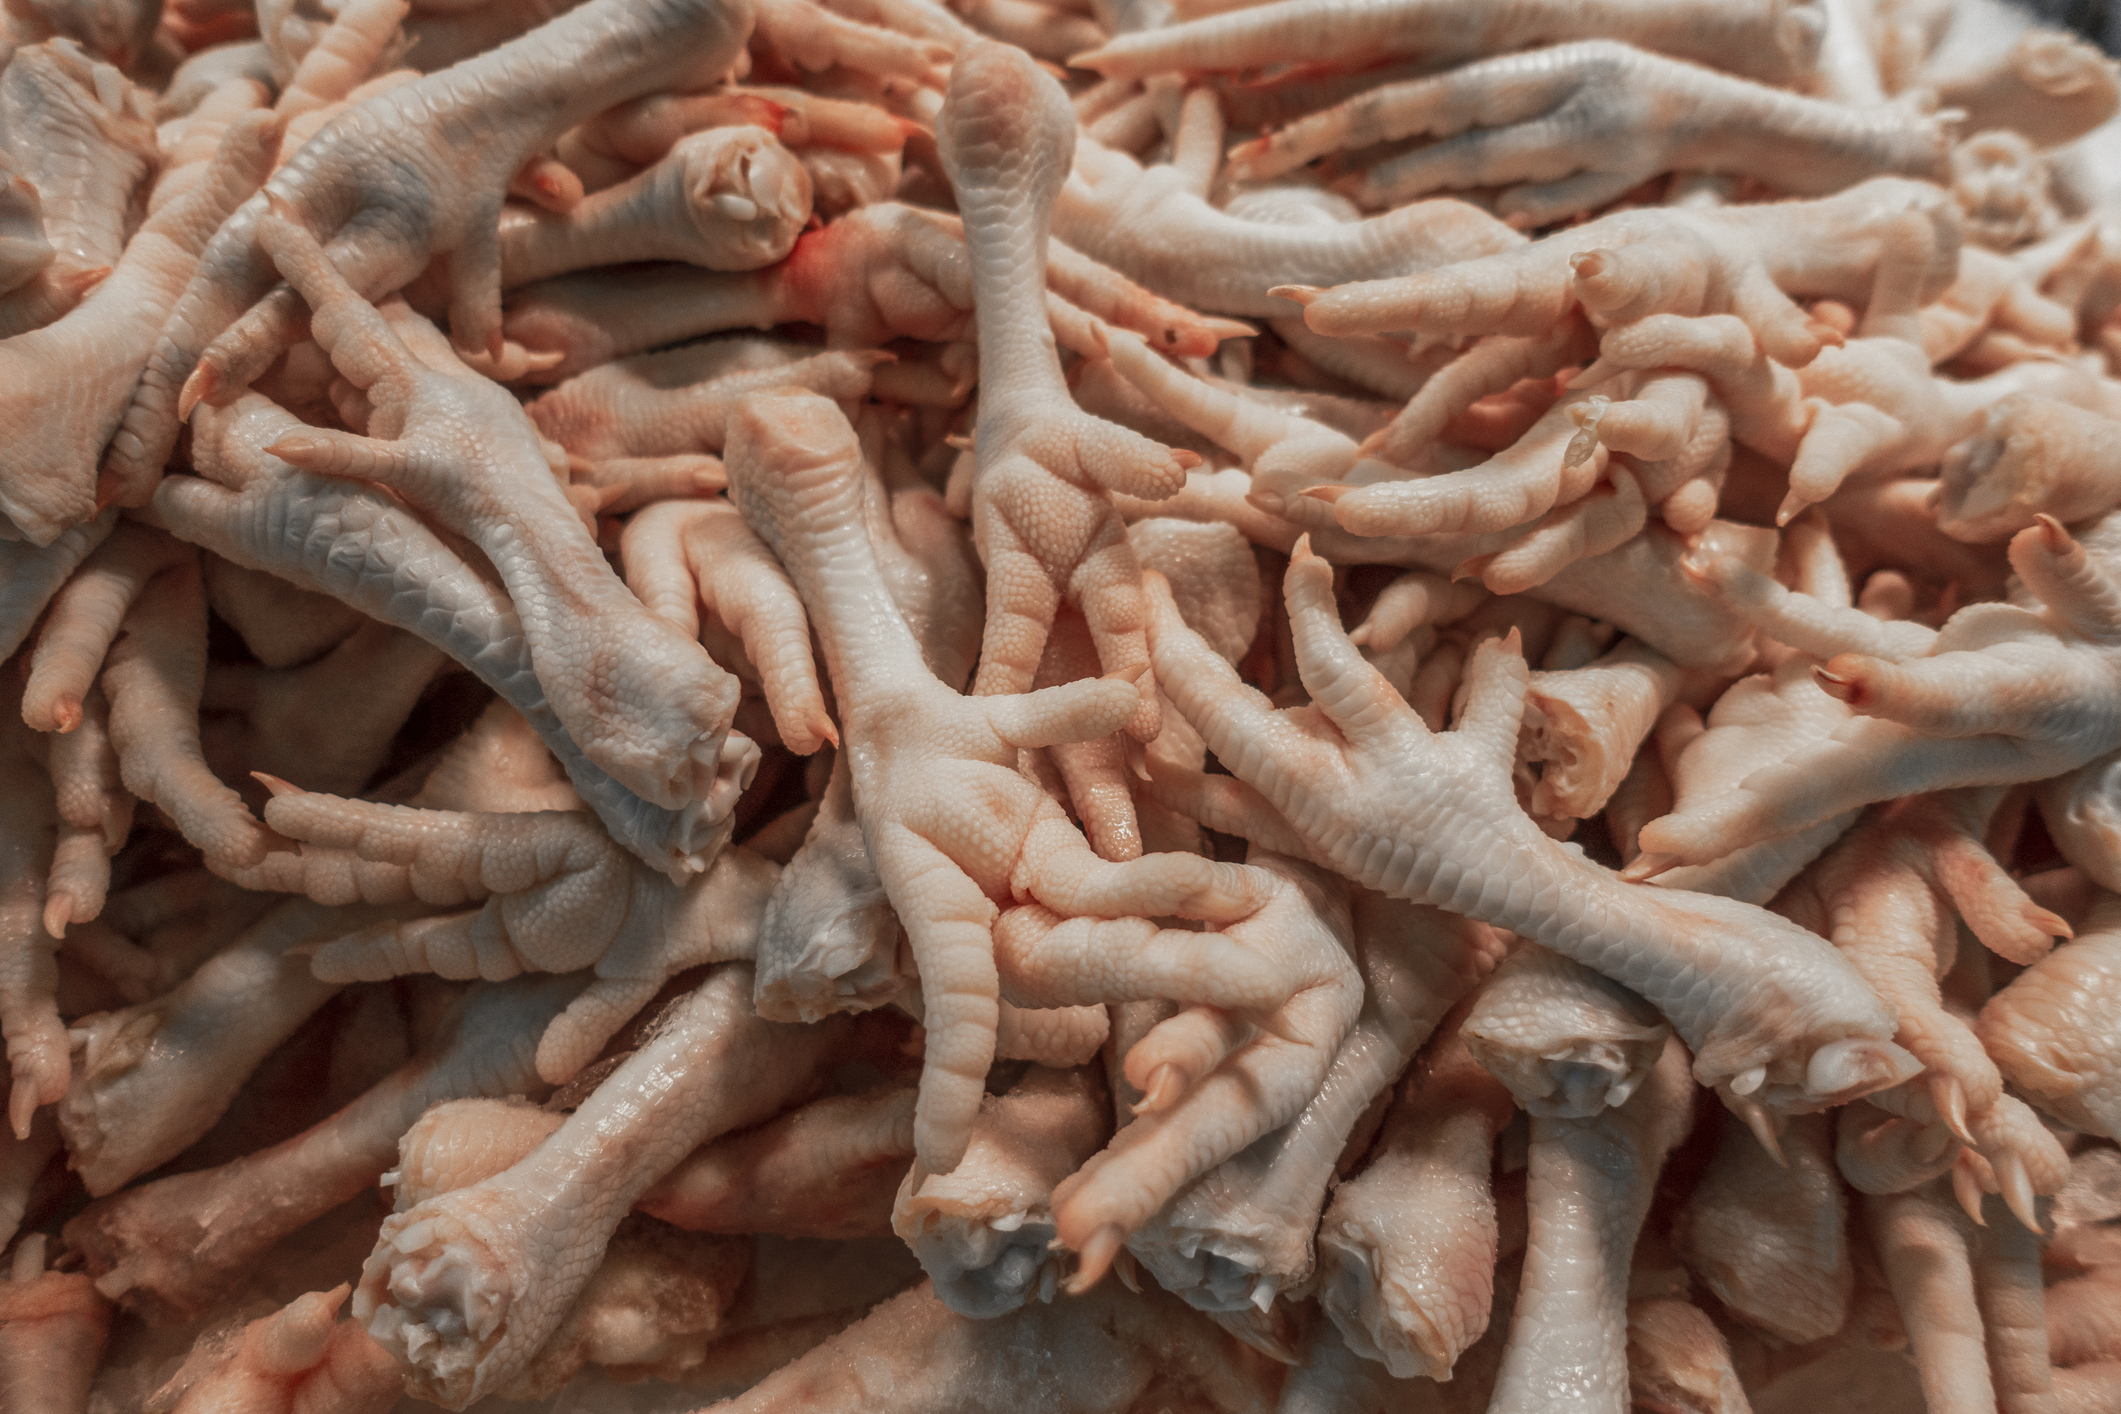 Chicken feet for sale at a market in Shanghai, China on Feb. 11, 2019. (ZhengXin/Getty Images)